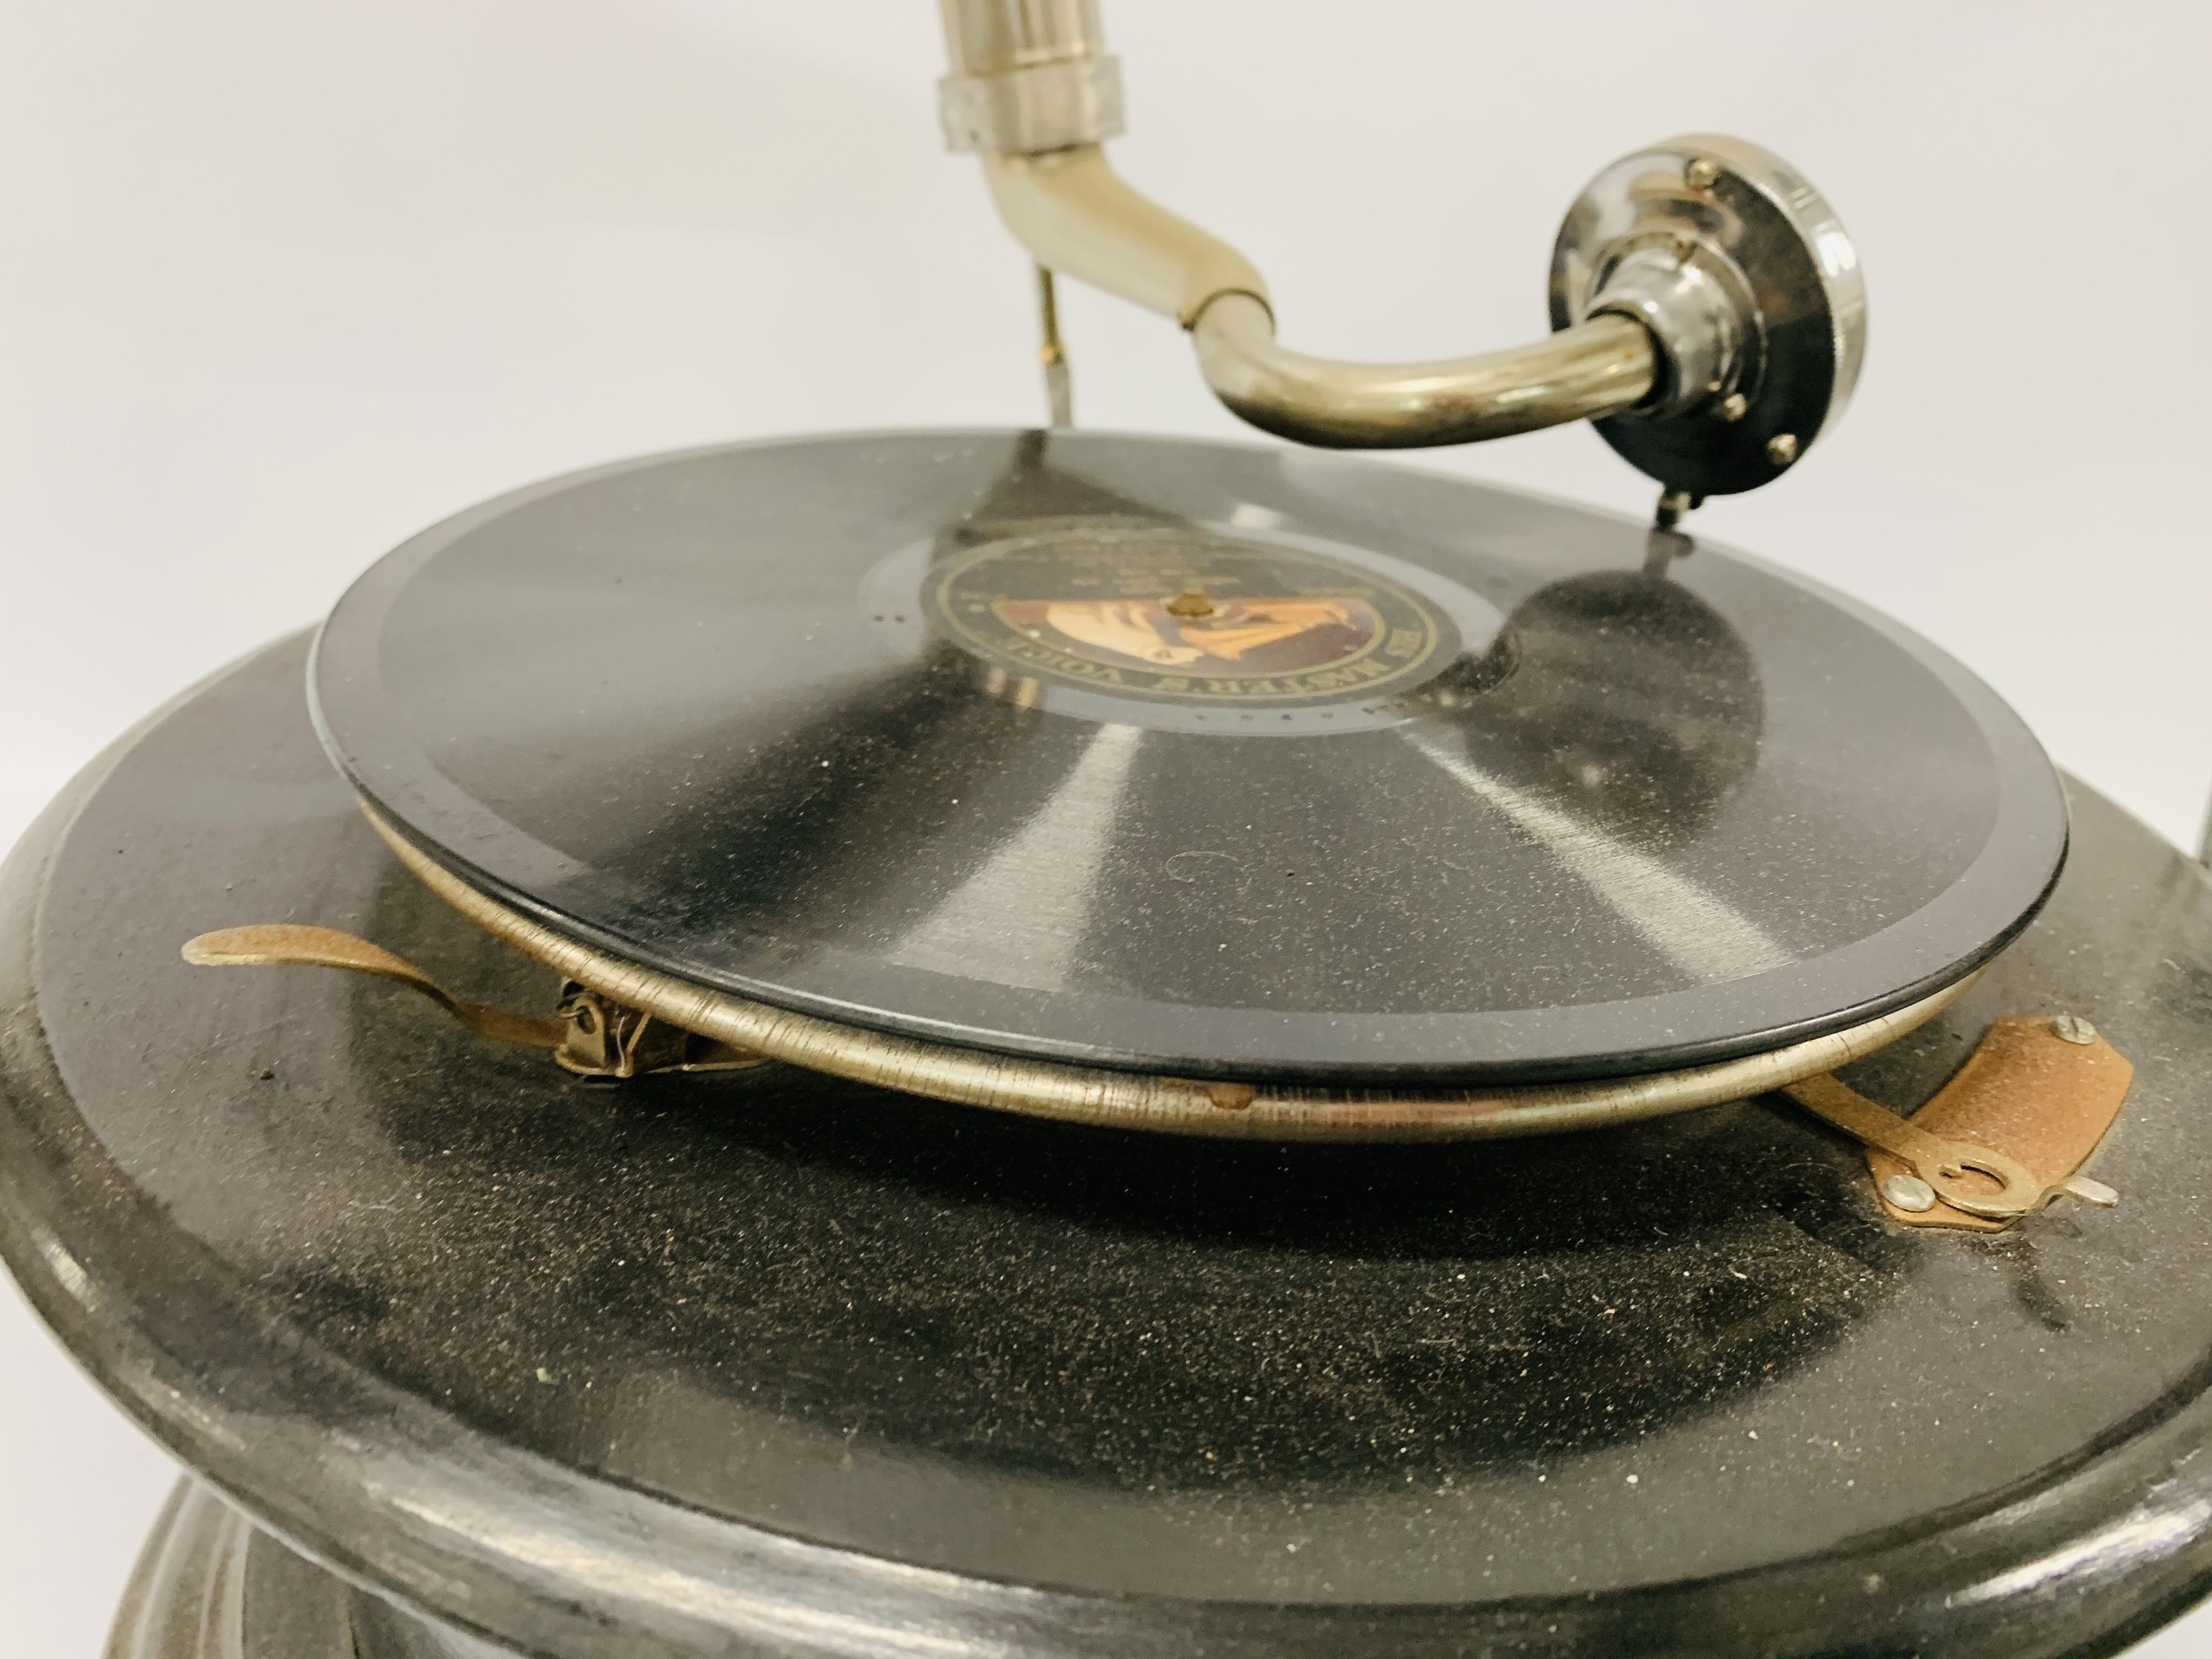 A TABLE TOP WIND UP HORN GRAMOPHONE MARKED "HIS MASTERS VOICE" - Image 3 of 8